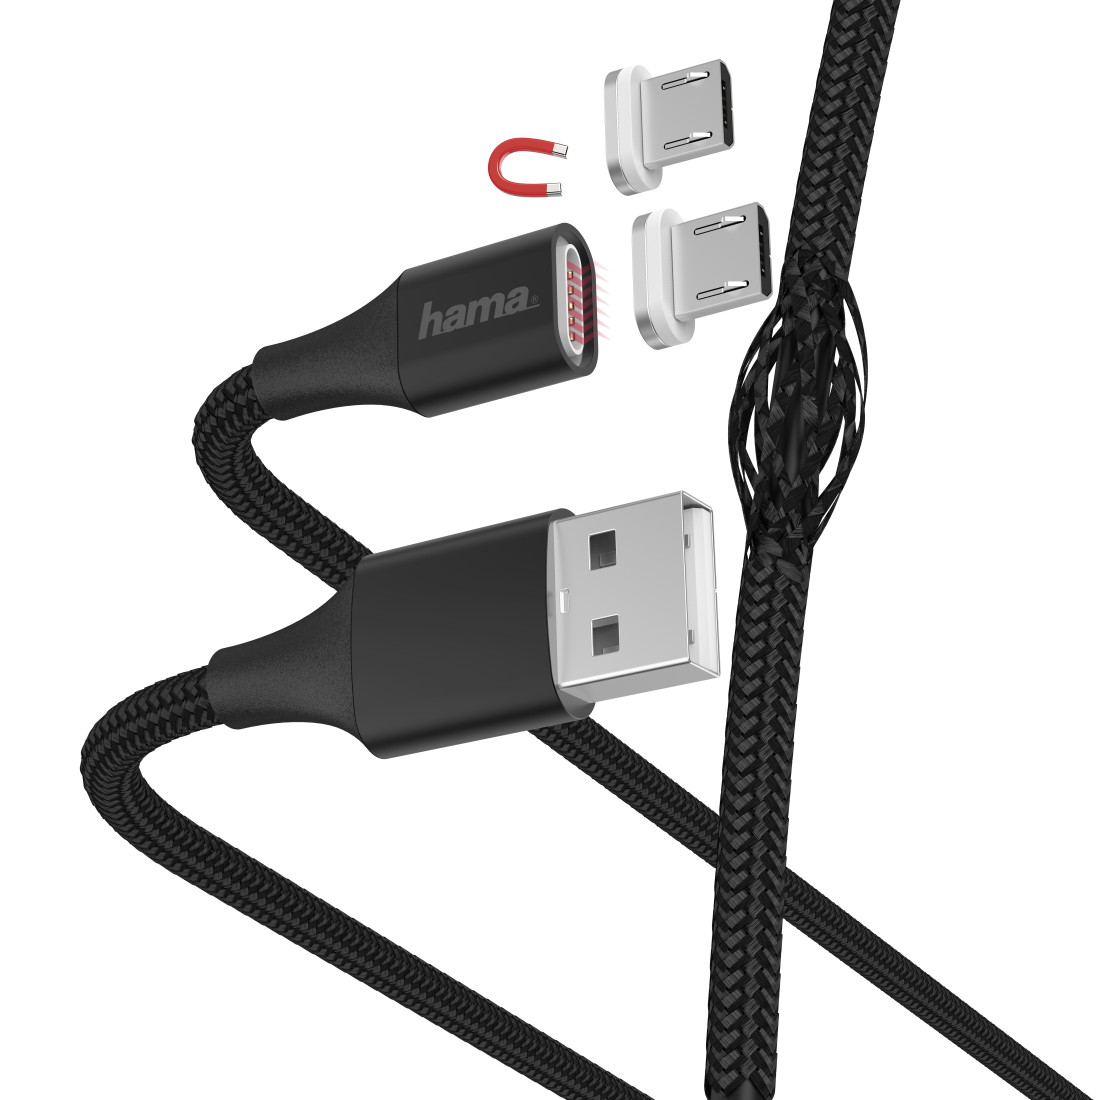 00178373 Hama "Magnetic" Charging/Data Cable, Micro-USB, 1 m, black